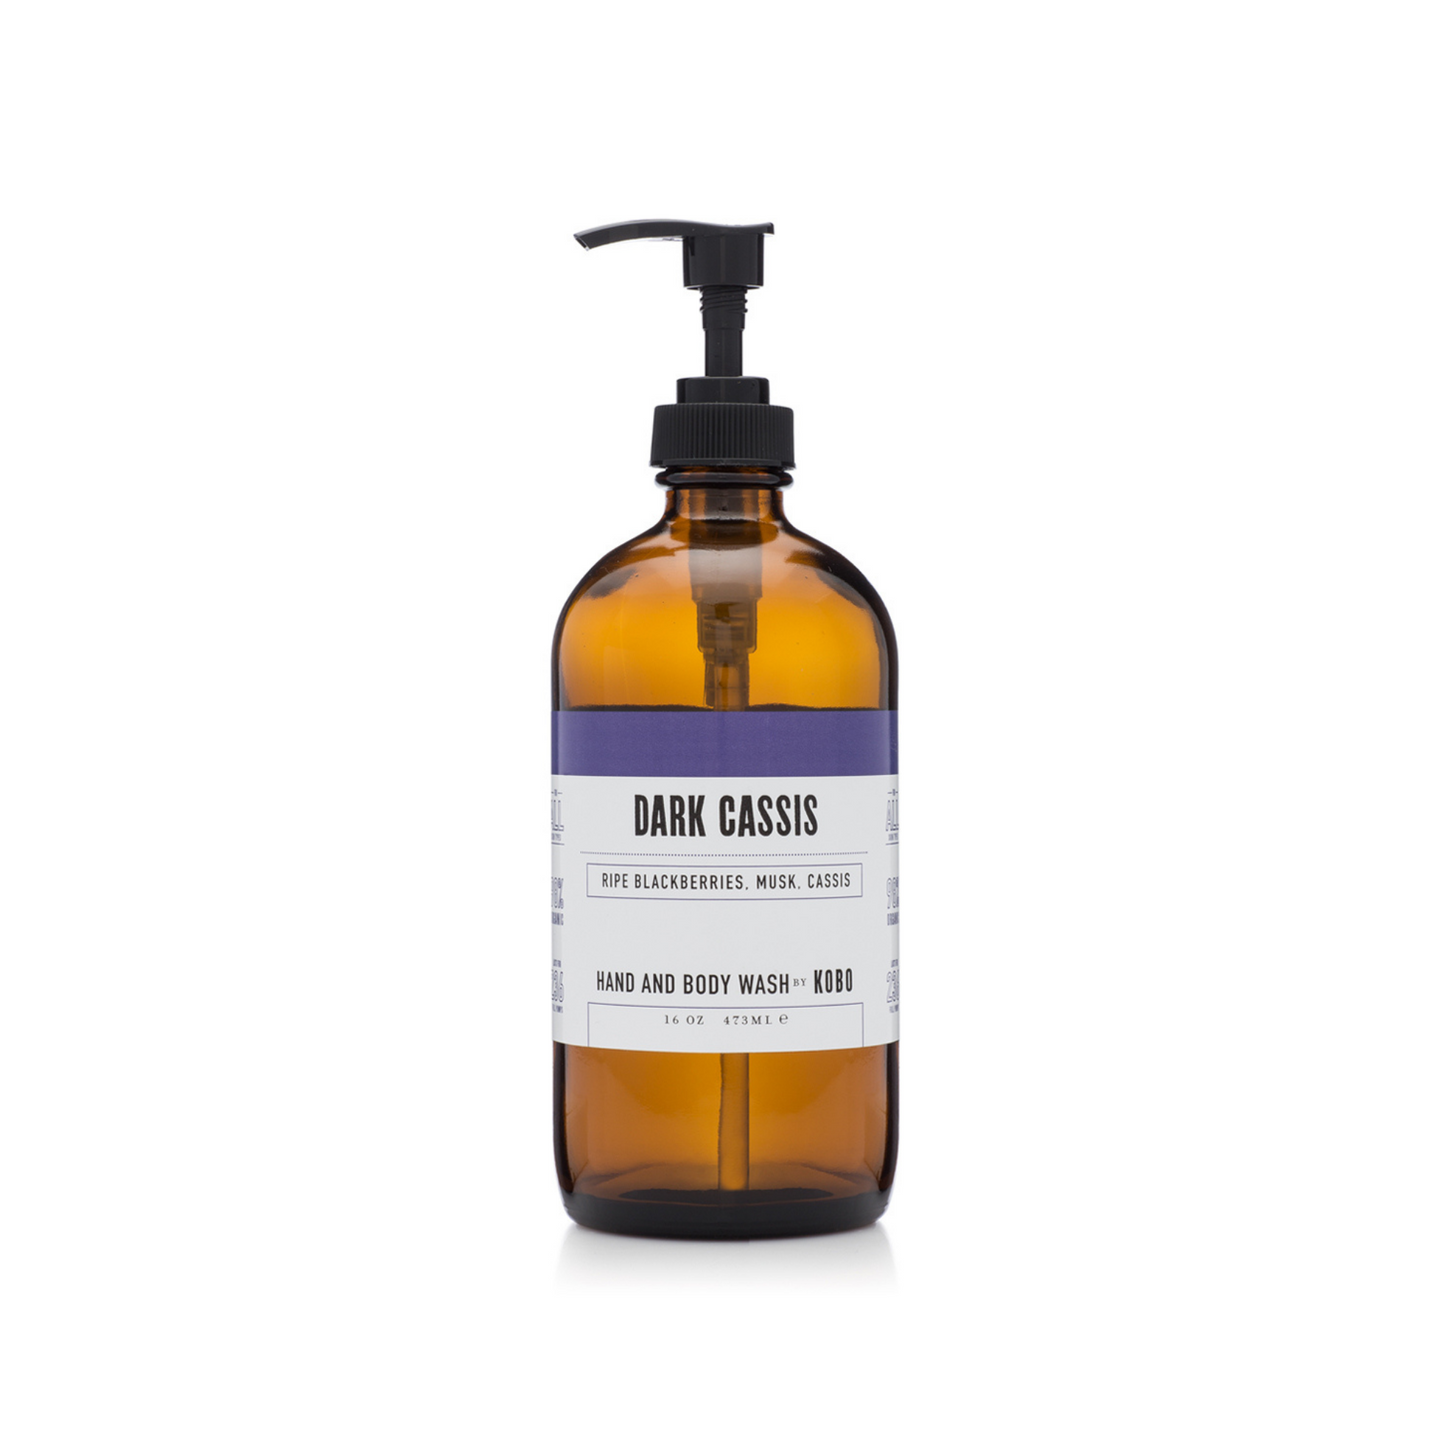 Primary Image of Dark Cassis Hand and Body Wash